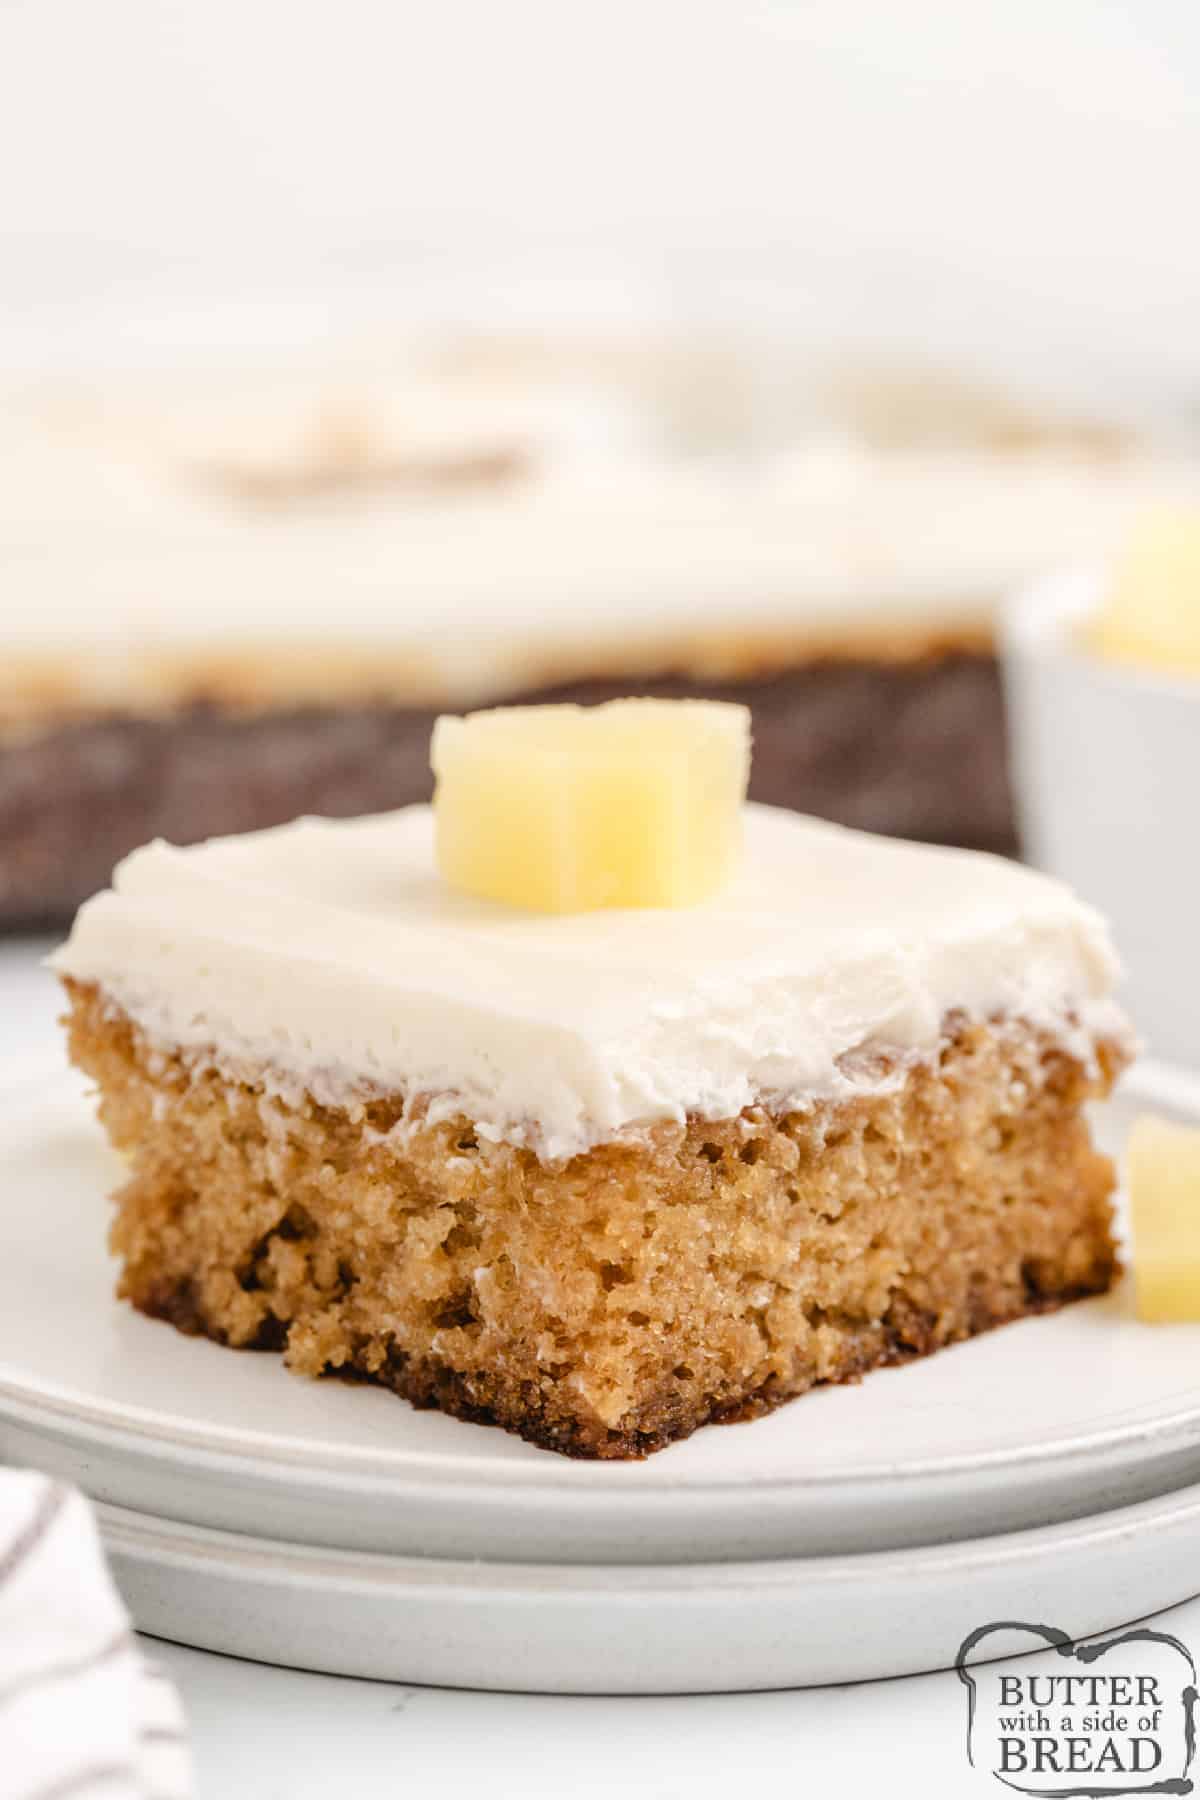 Easy Pineapple Cake made with crushed pineapple, then topped with a simple cream cheese frosting. This easy cake recipe is perfectly moist and full of flavor!